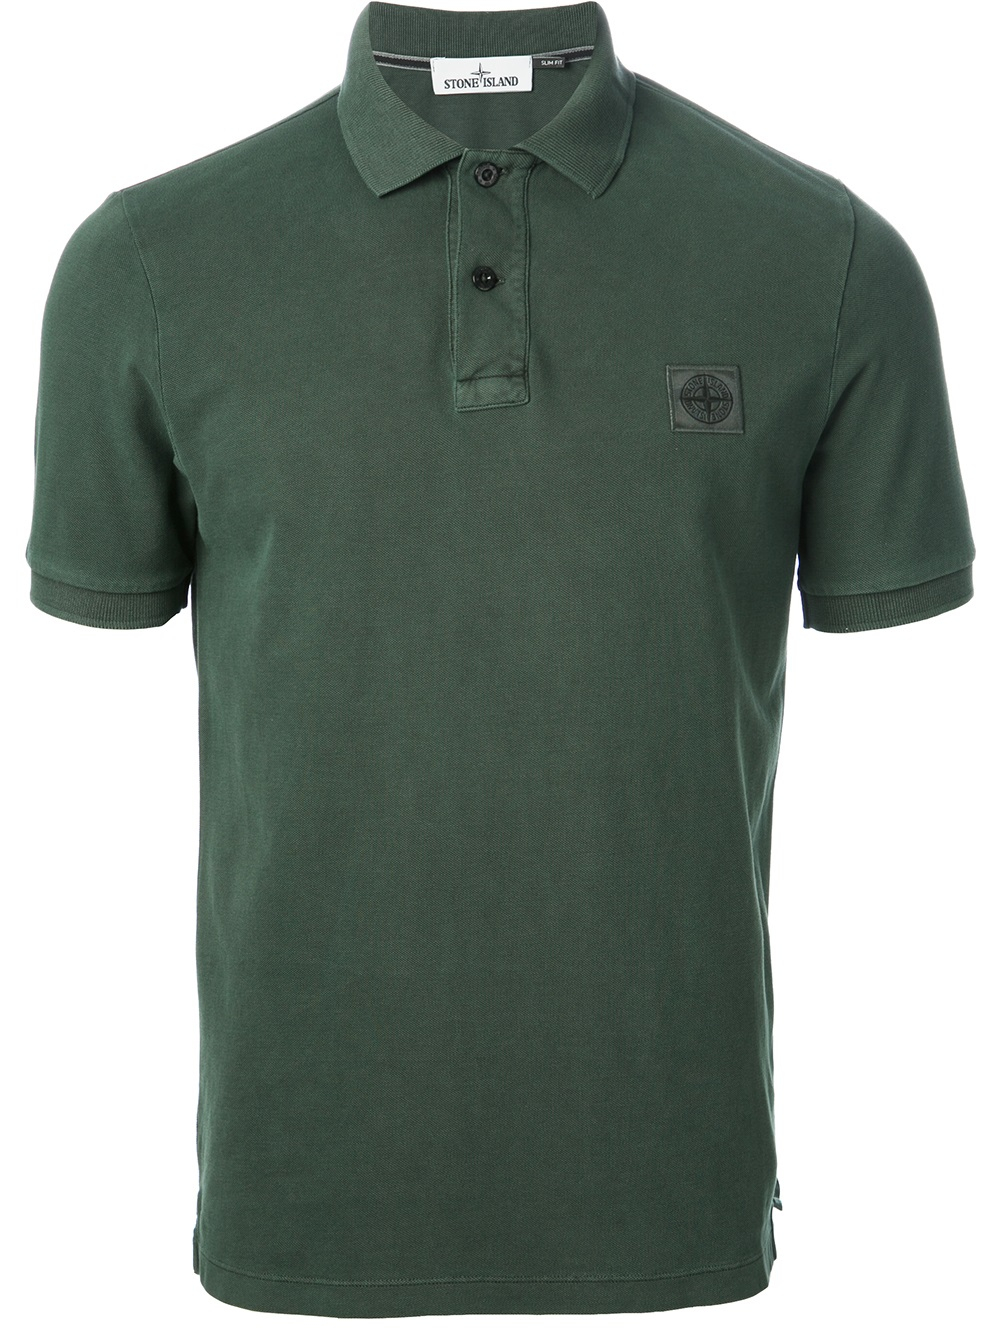 Stone Island Cotton Knitted Polo Shirt in Green for Men Mens T-shirts Stone Island T-shirts 